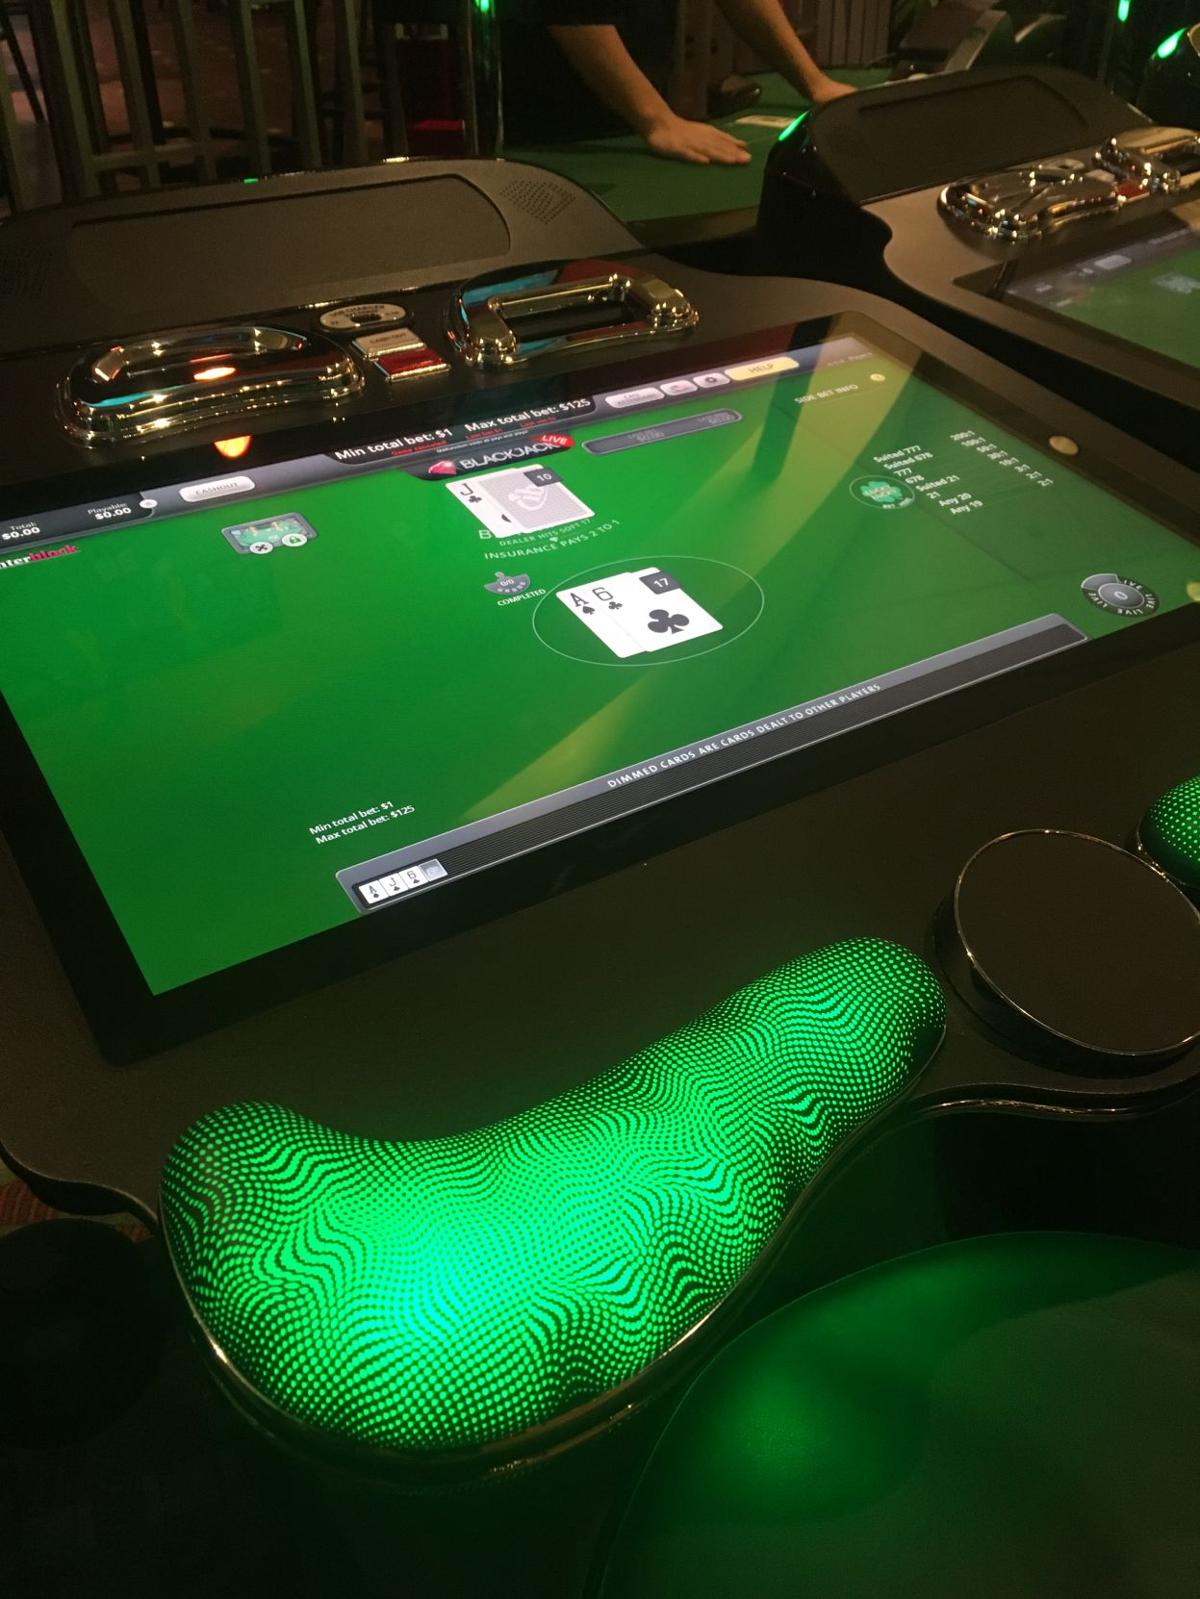 Running Aces introduces new gaming technology